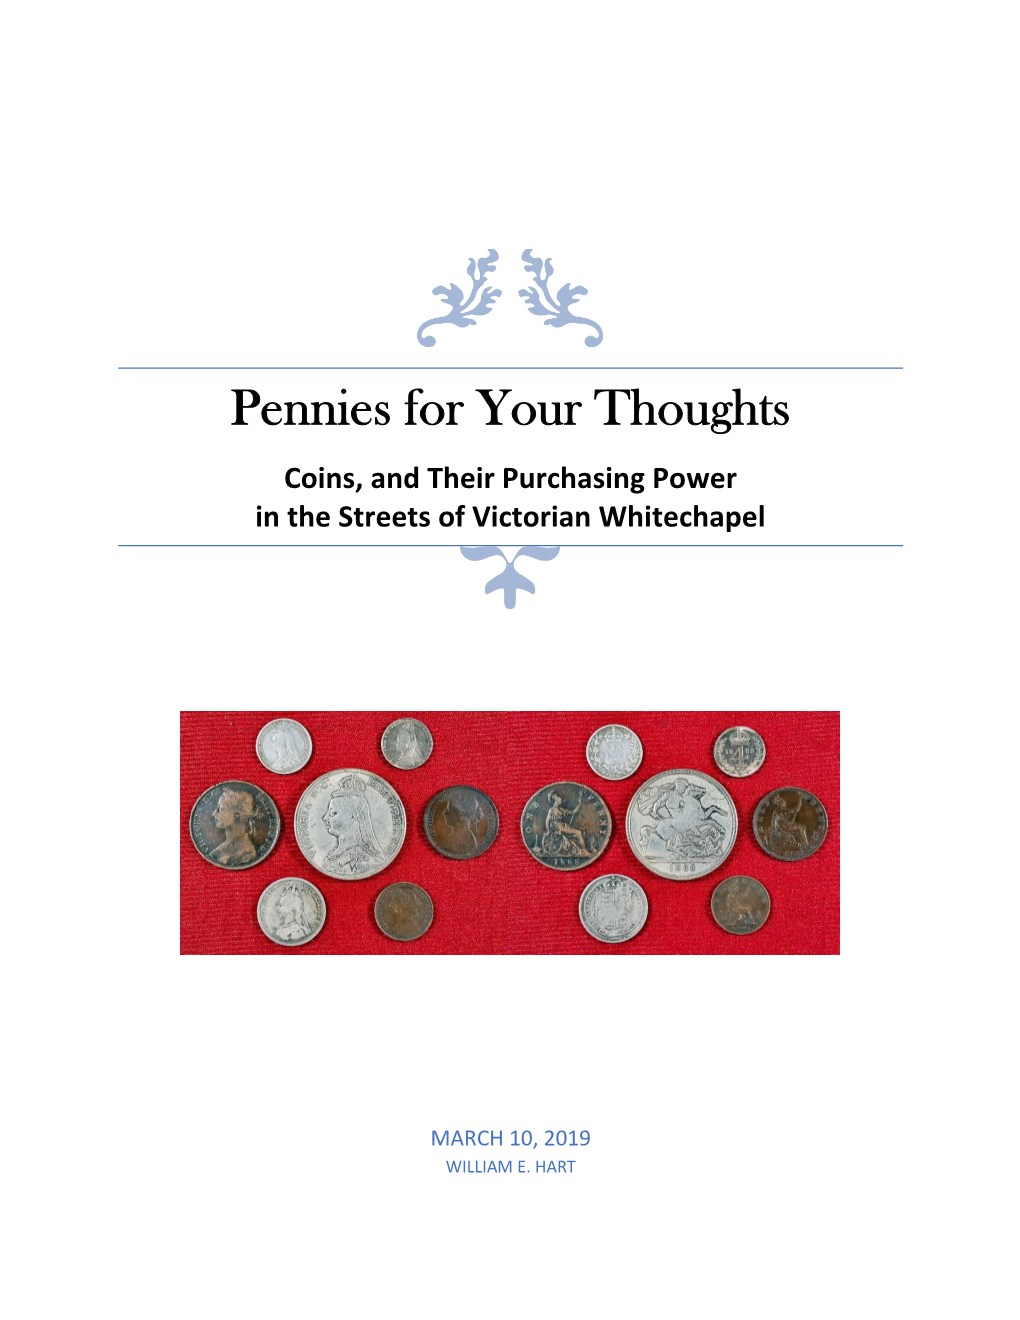 Pennies for Your Thoughts Coins, and Their Purchasing Power in the Streets of Victorian Whitechapel